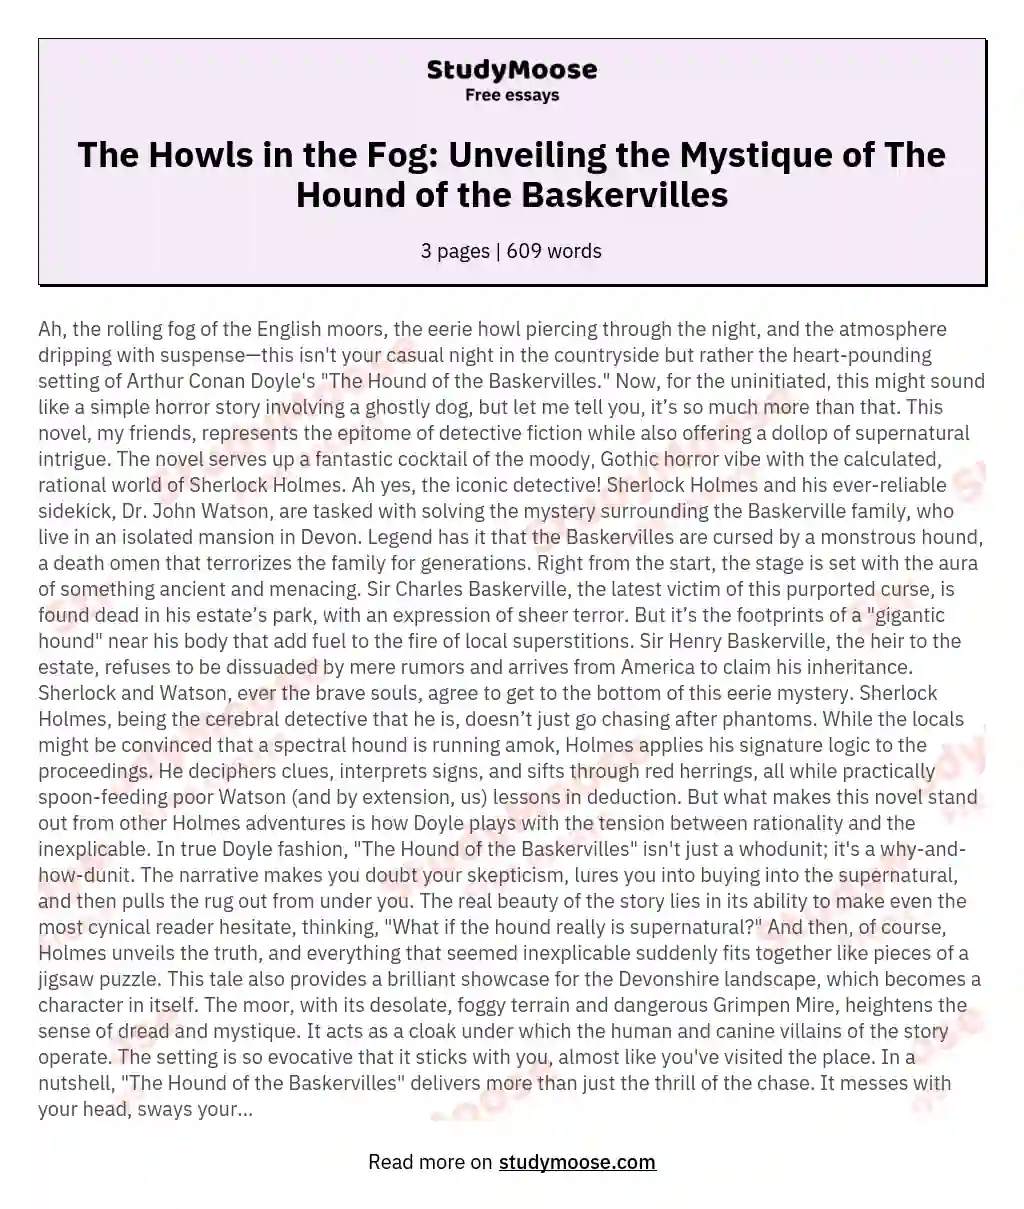 The Howls in the Fog: Unveiling the Mystique of The Hound of the Baskervilles essay